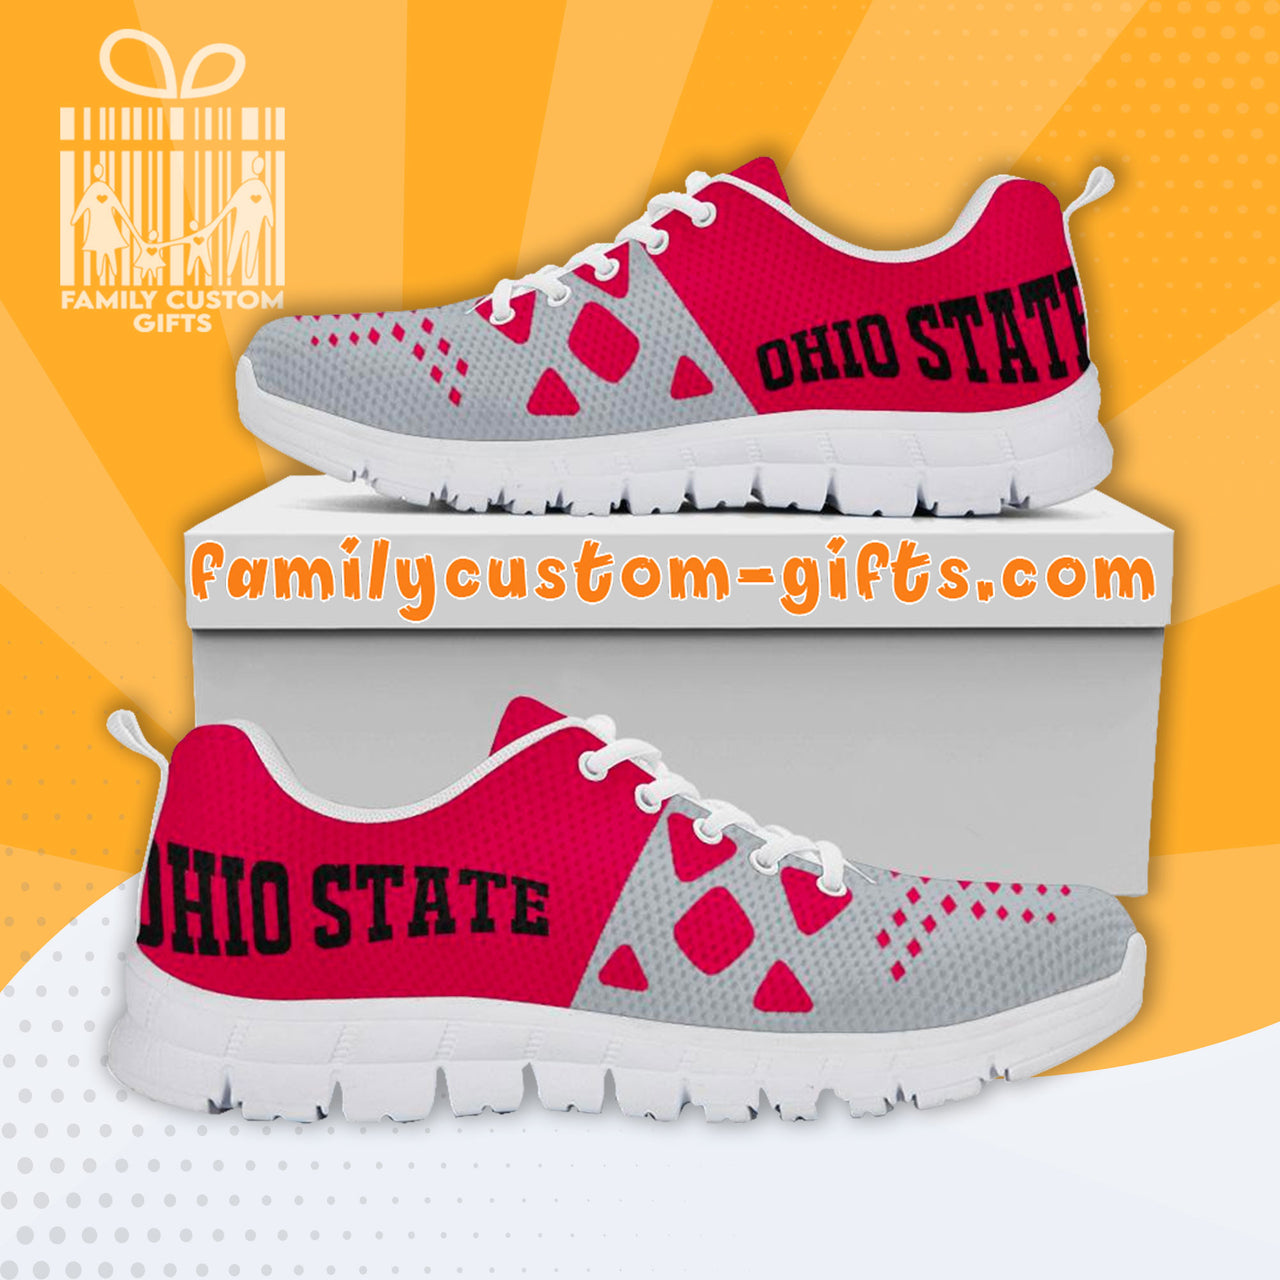 Ohio State Custom Shoes for Men Women 3D Print Fashion Sneaker Gifts for Her Him